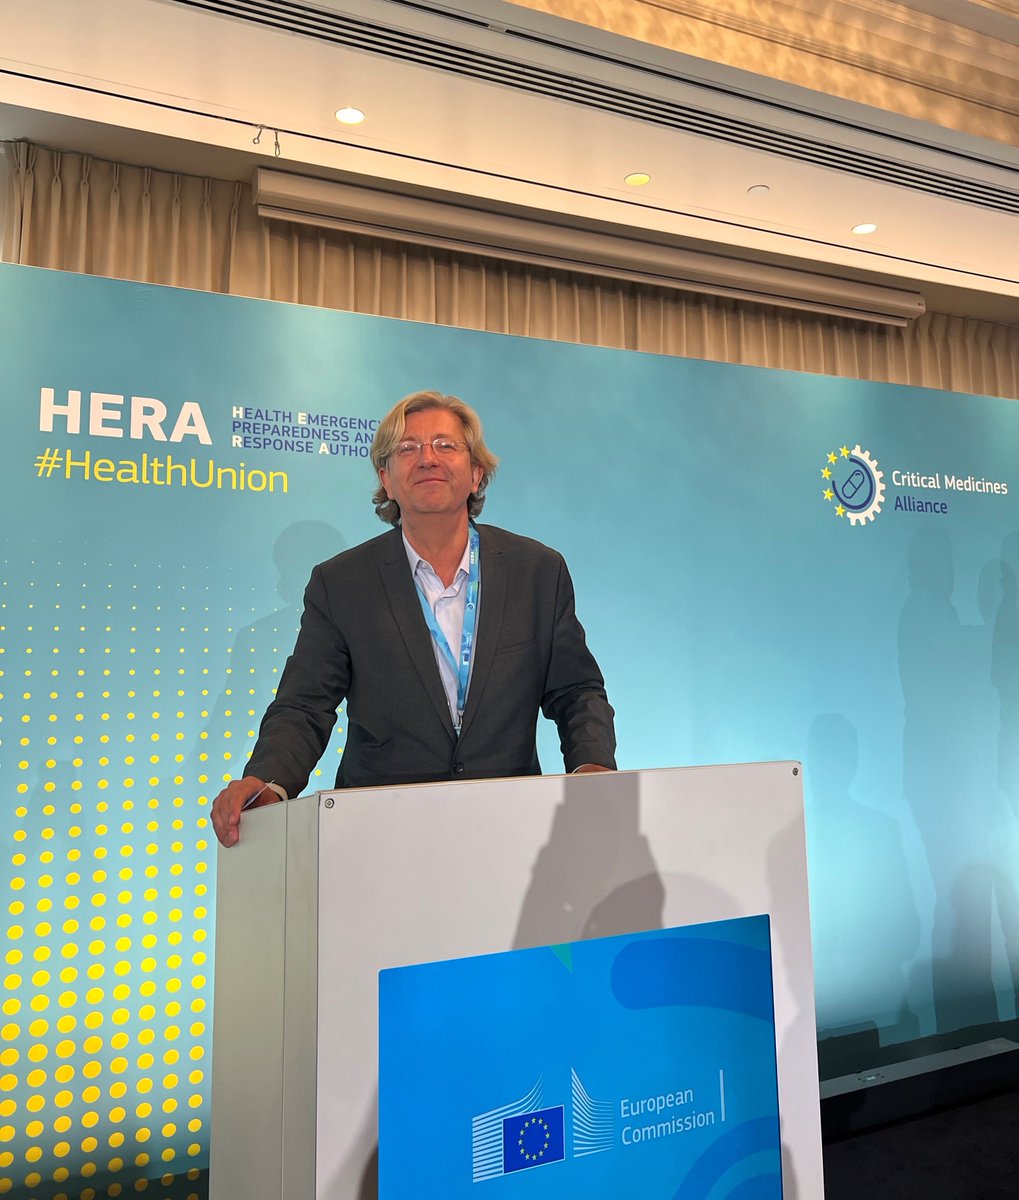 Our CEO, Johannes Khinast, after the Critical Medicines Alliance meeting by EU’s HERA (European Health Emergency Response Agency). Finally, Europe is waking up and is taking steps to battle drug supply shortages and problems. RCPE is proud to be part of the solution! #CMA #HERA